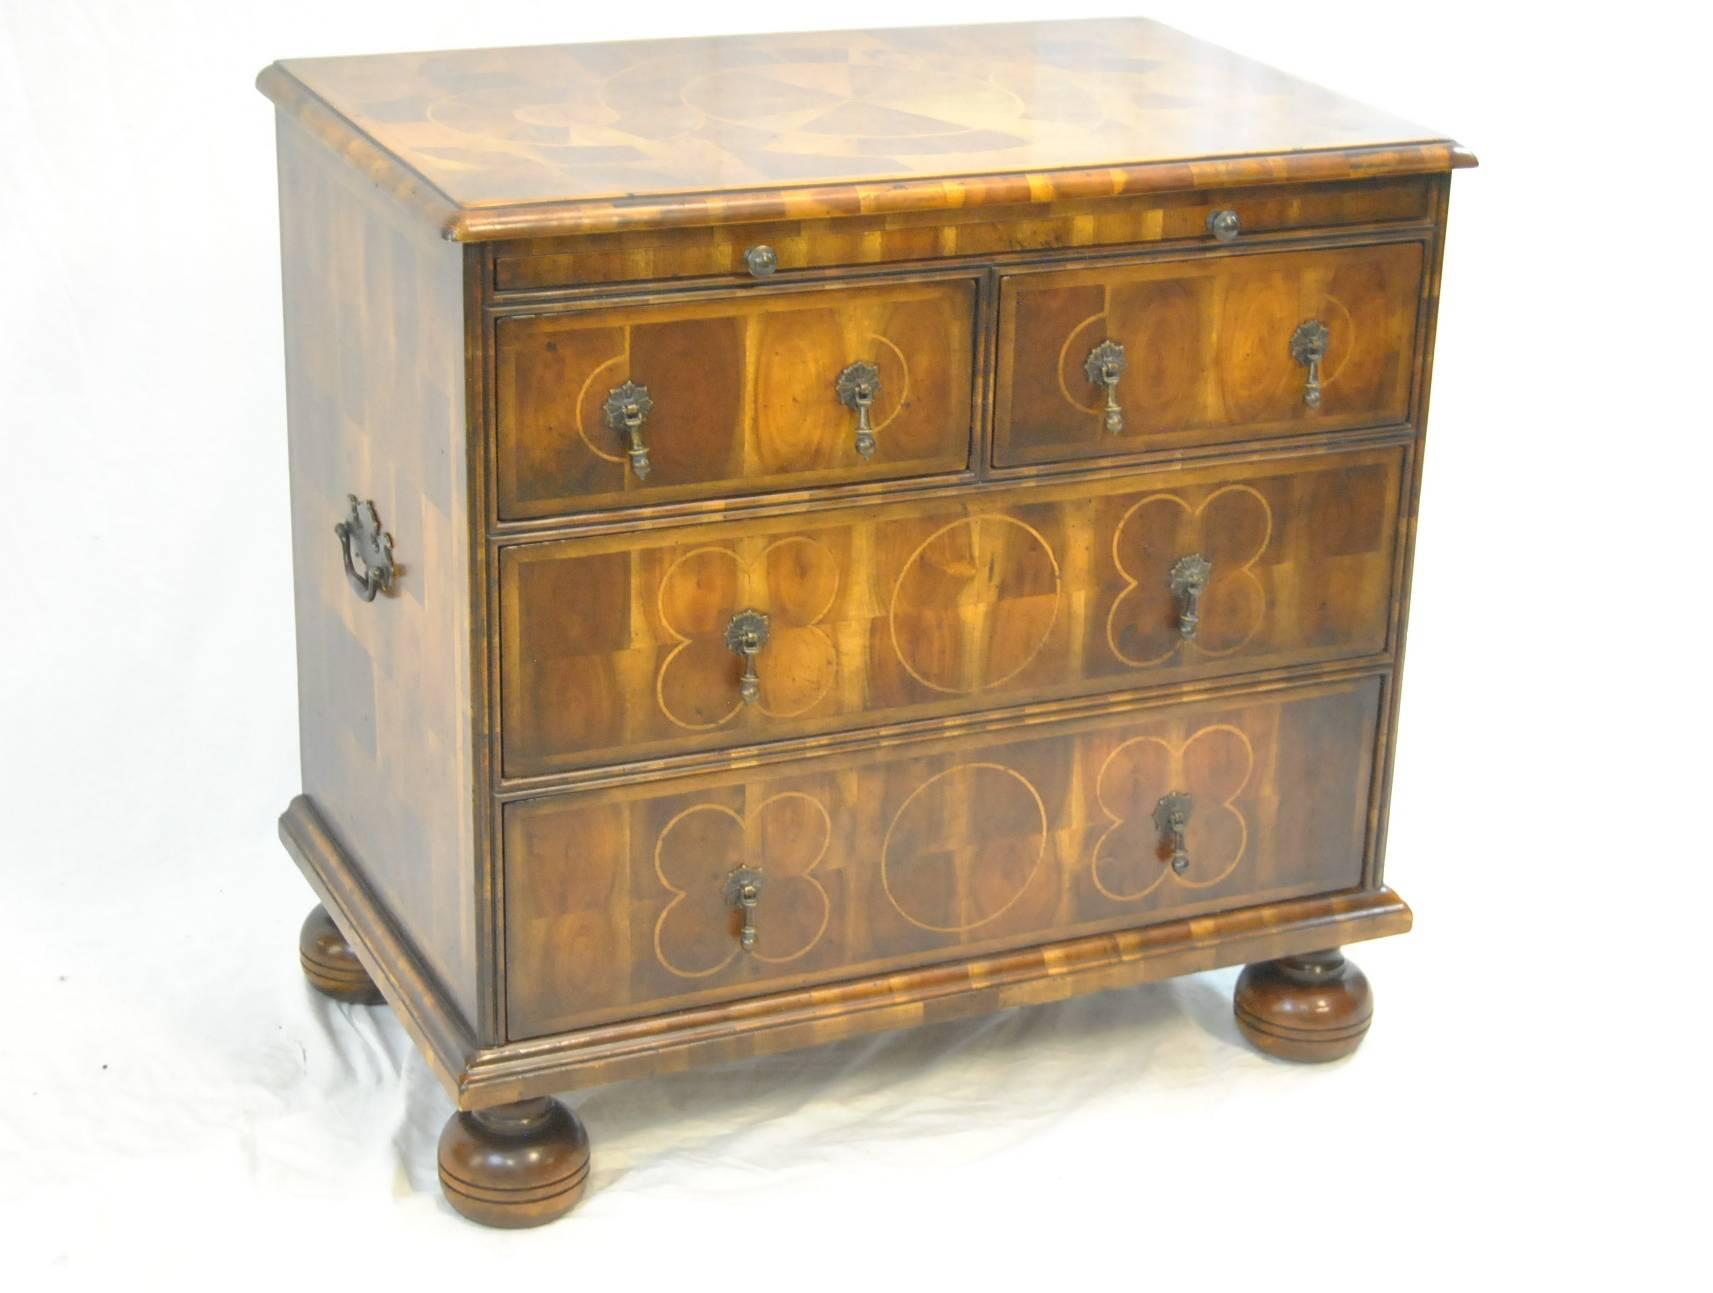 A stunning oyster walnut bachelor chest by Theodore Alexander. It features four dovetailed drawers, bunn feet, a pull-out shelf with a leather insert and a fleur de lis pattern. It also has a parquetry inlaid top and sides with cross grain moulding.